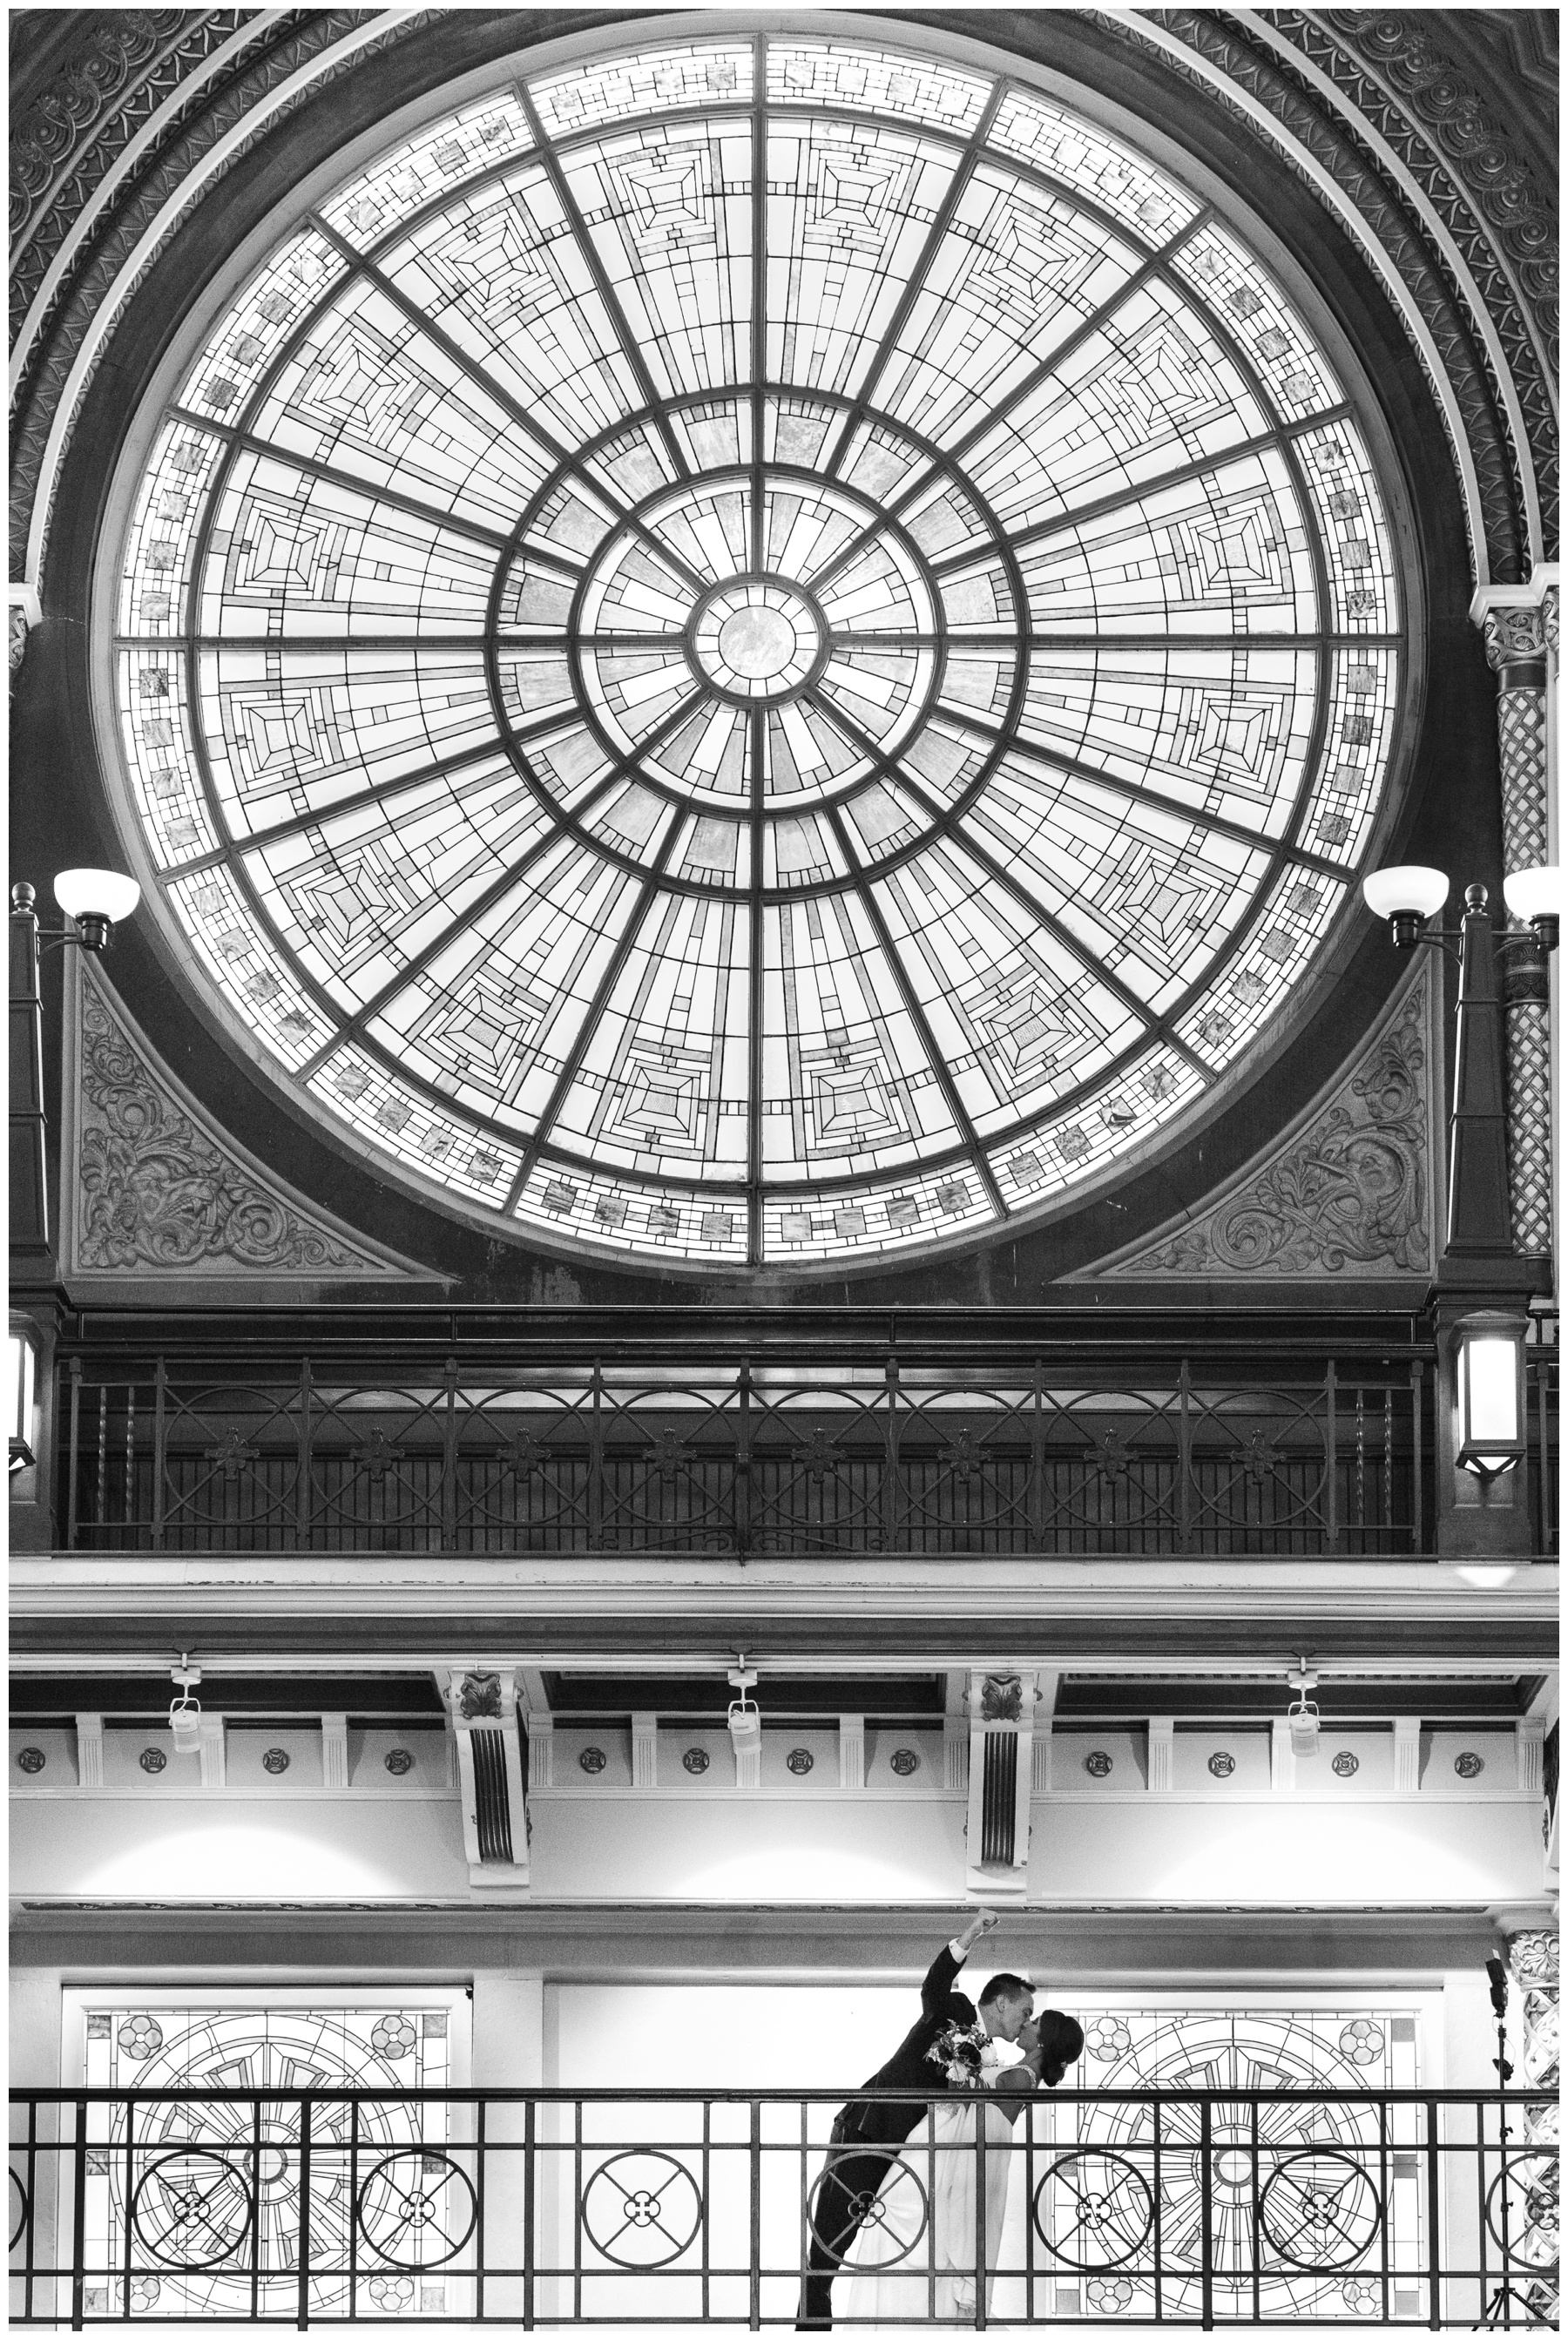 The Grand Hall Union Station in Downtown Indianapolis